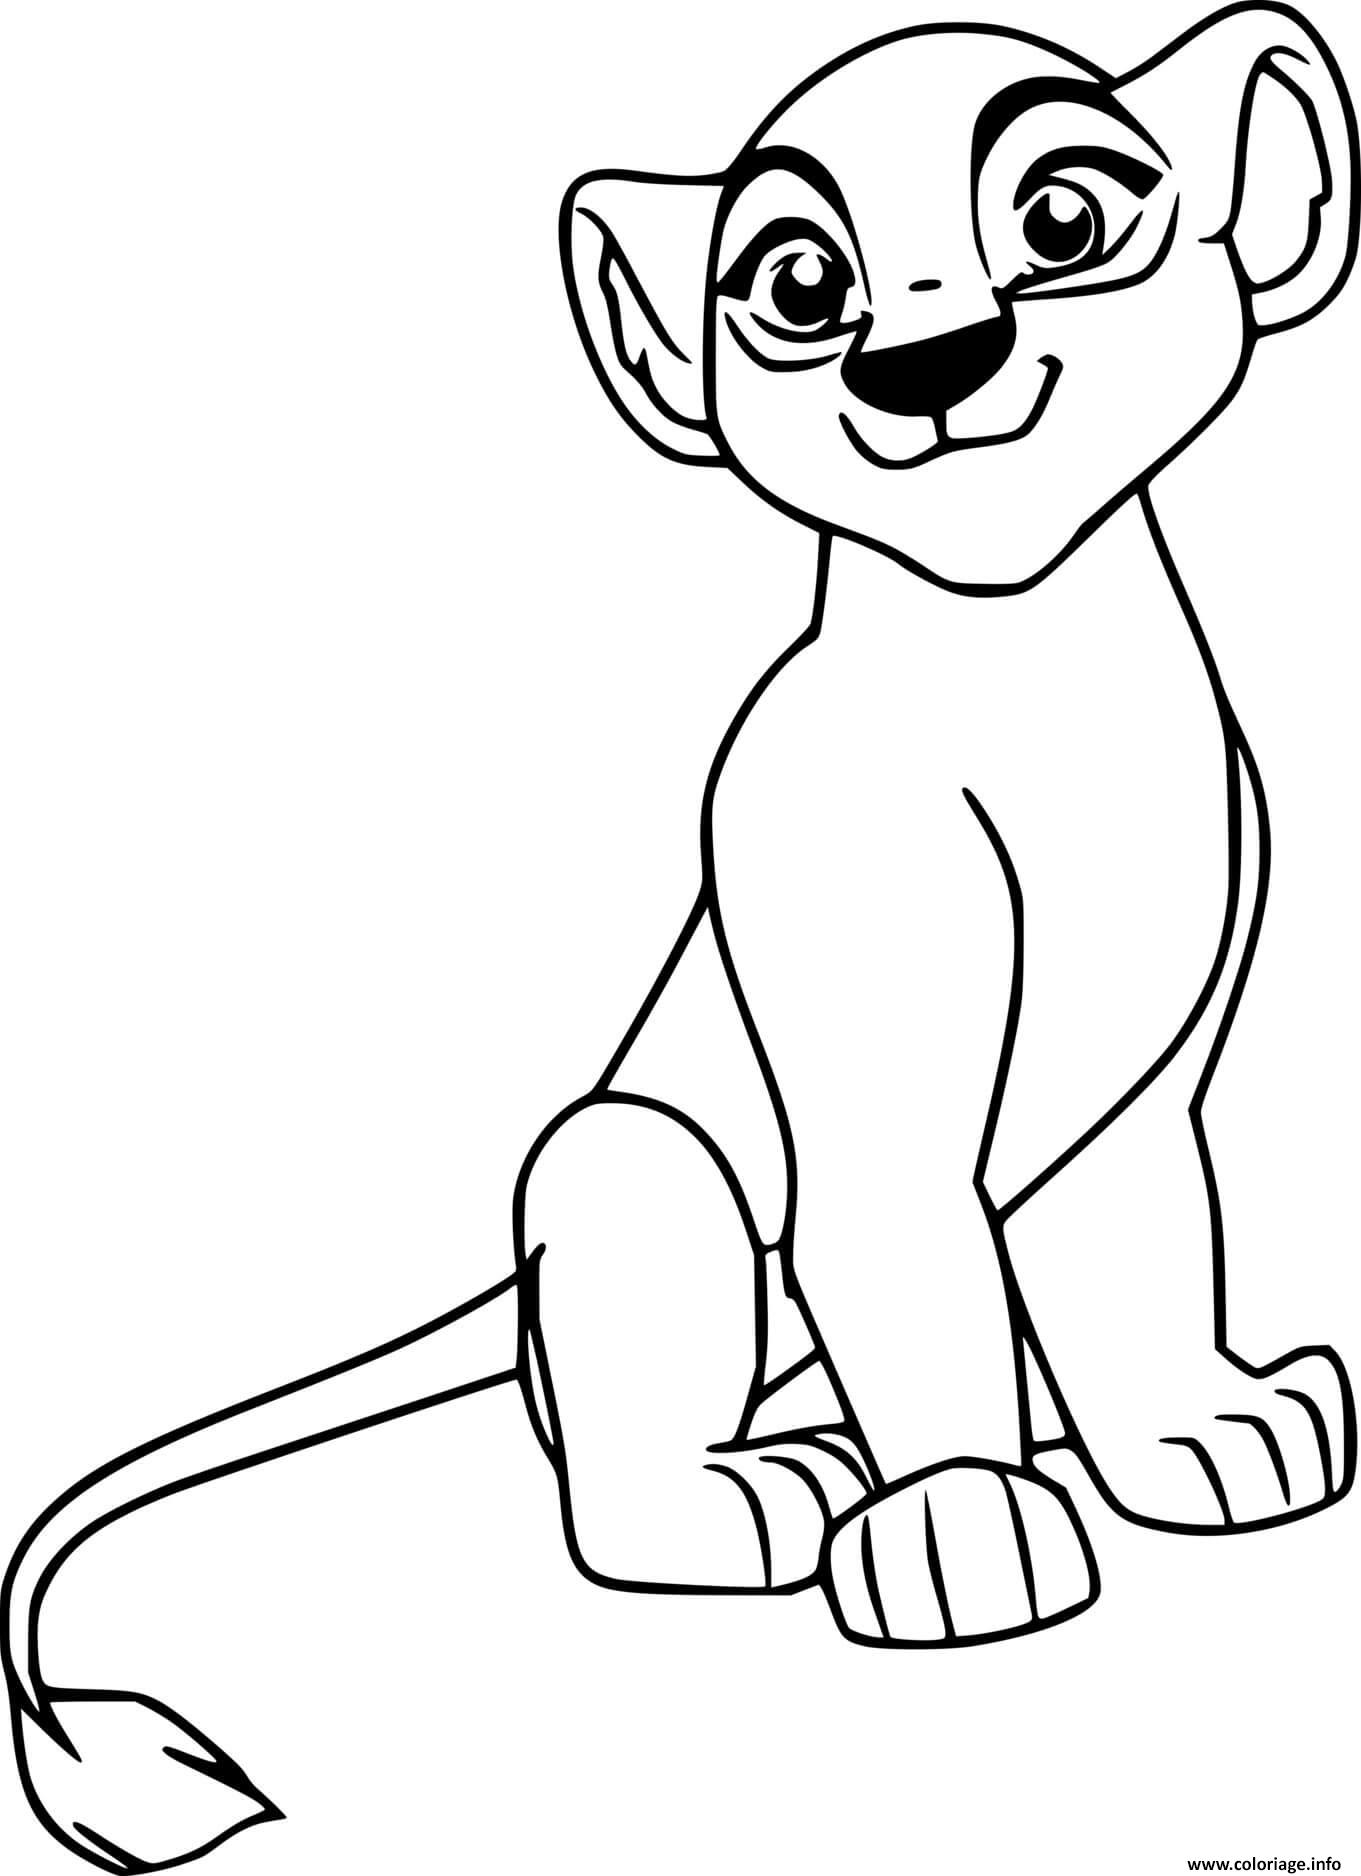 Lion Guard Coloring Pages Kiara Free Printable Coloring Pages | Images ...